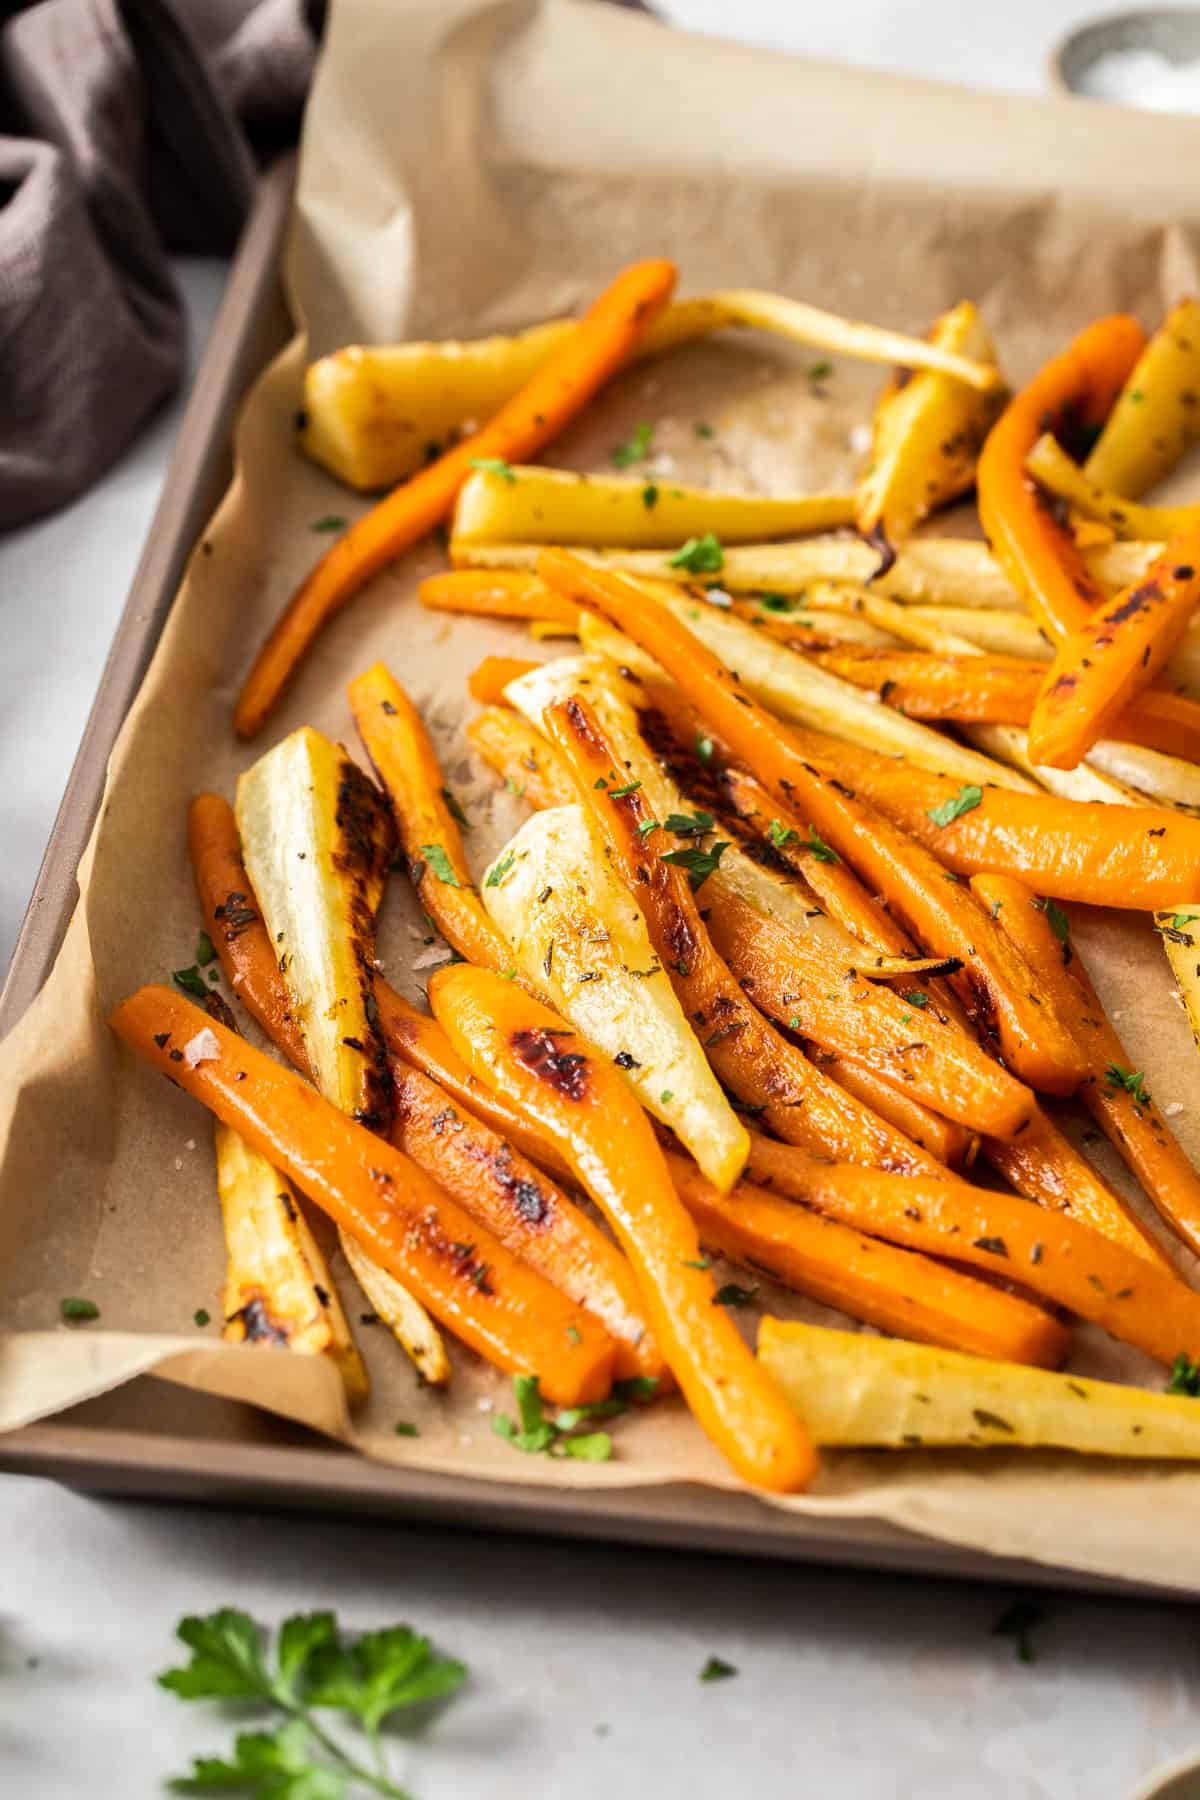 Baking tray with roasted carrots and parsnips, garnished with some fresh parsley.